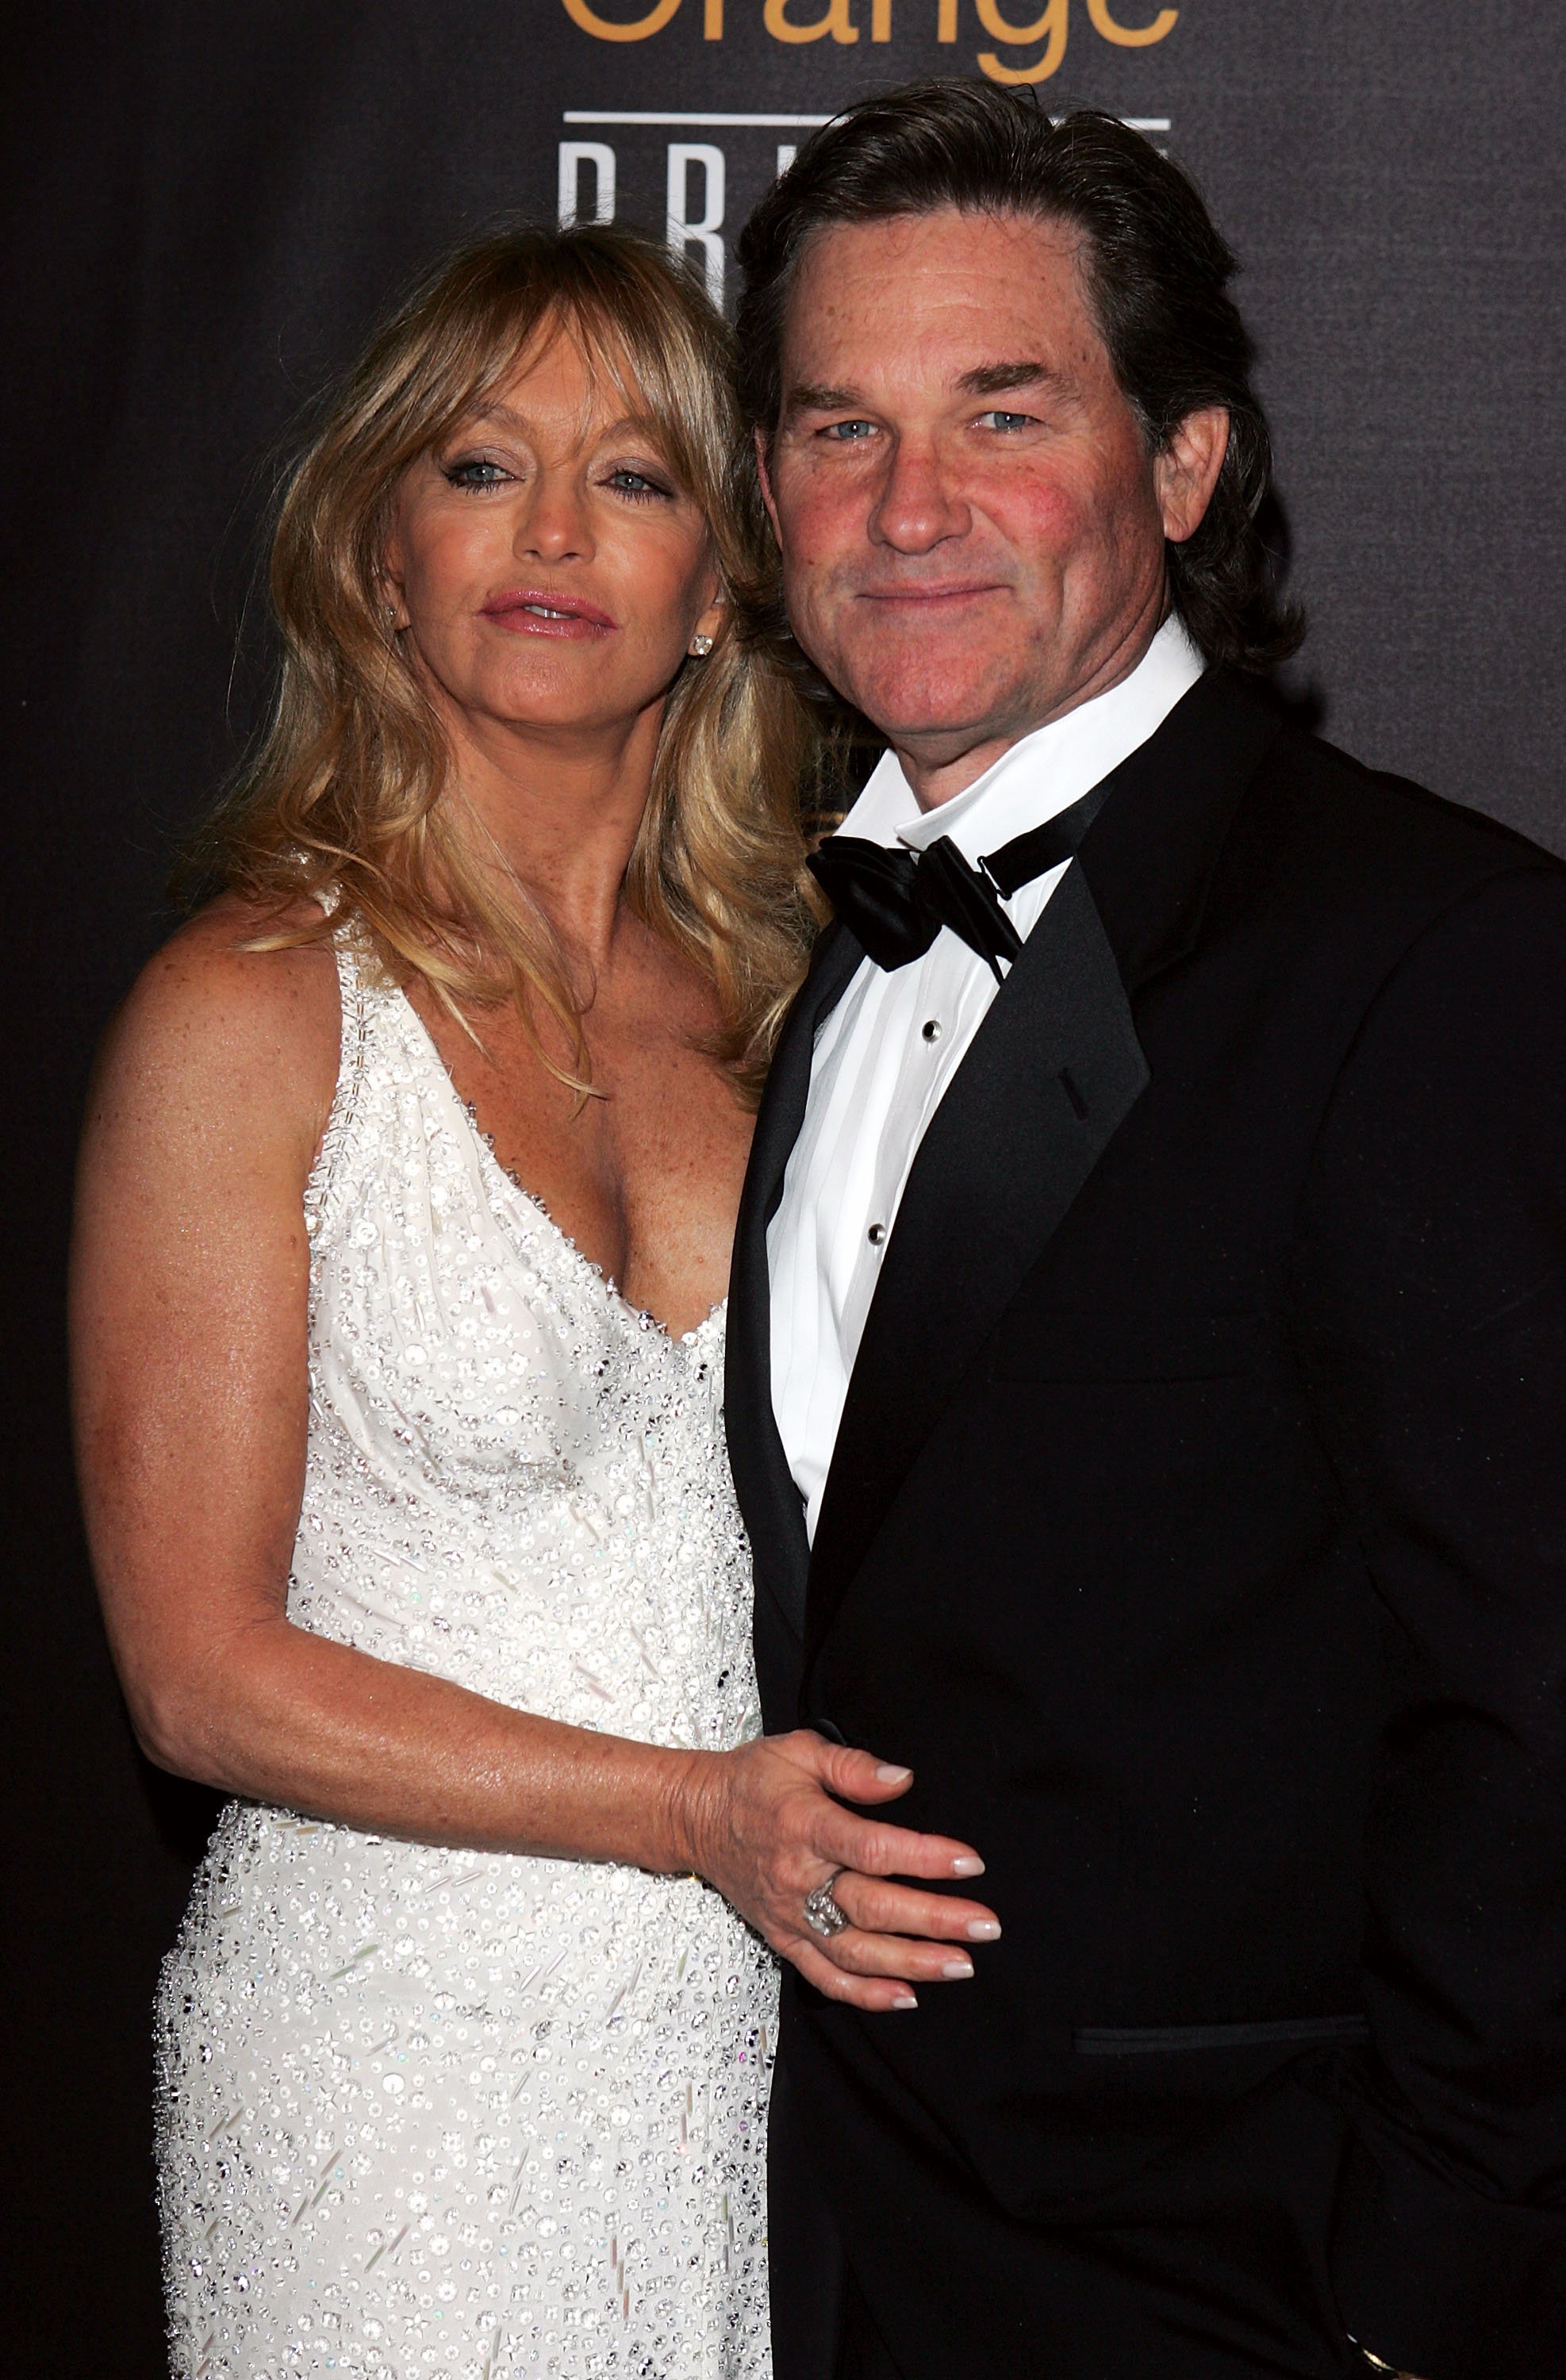 Goldie Hawn and Kurt Russell at the Odeon Leicester Square on February 12, 2005 in London | Source: Getty Images